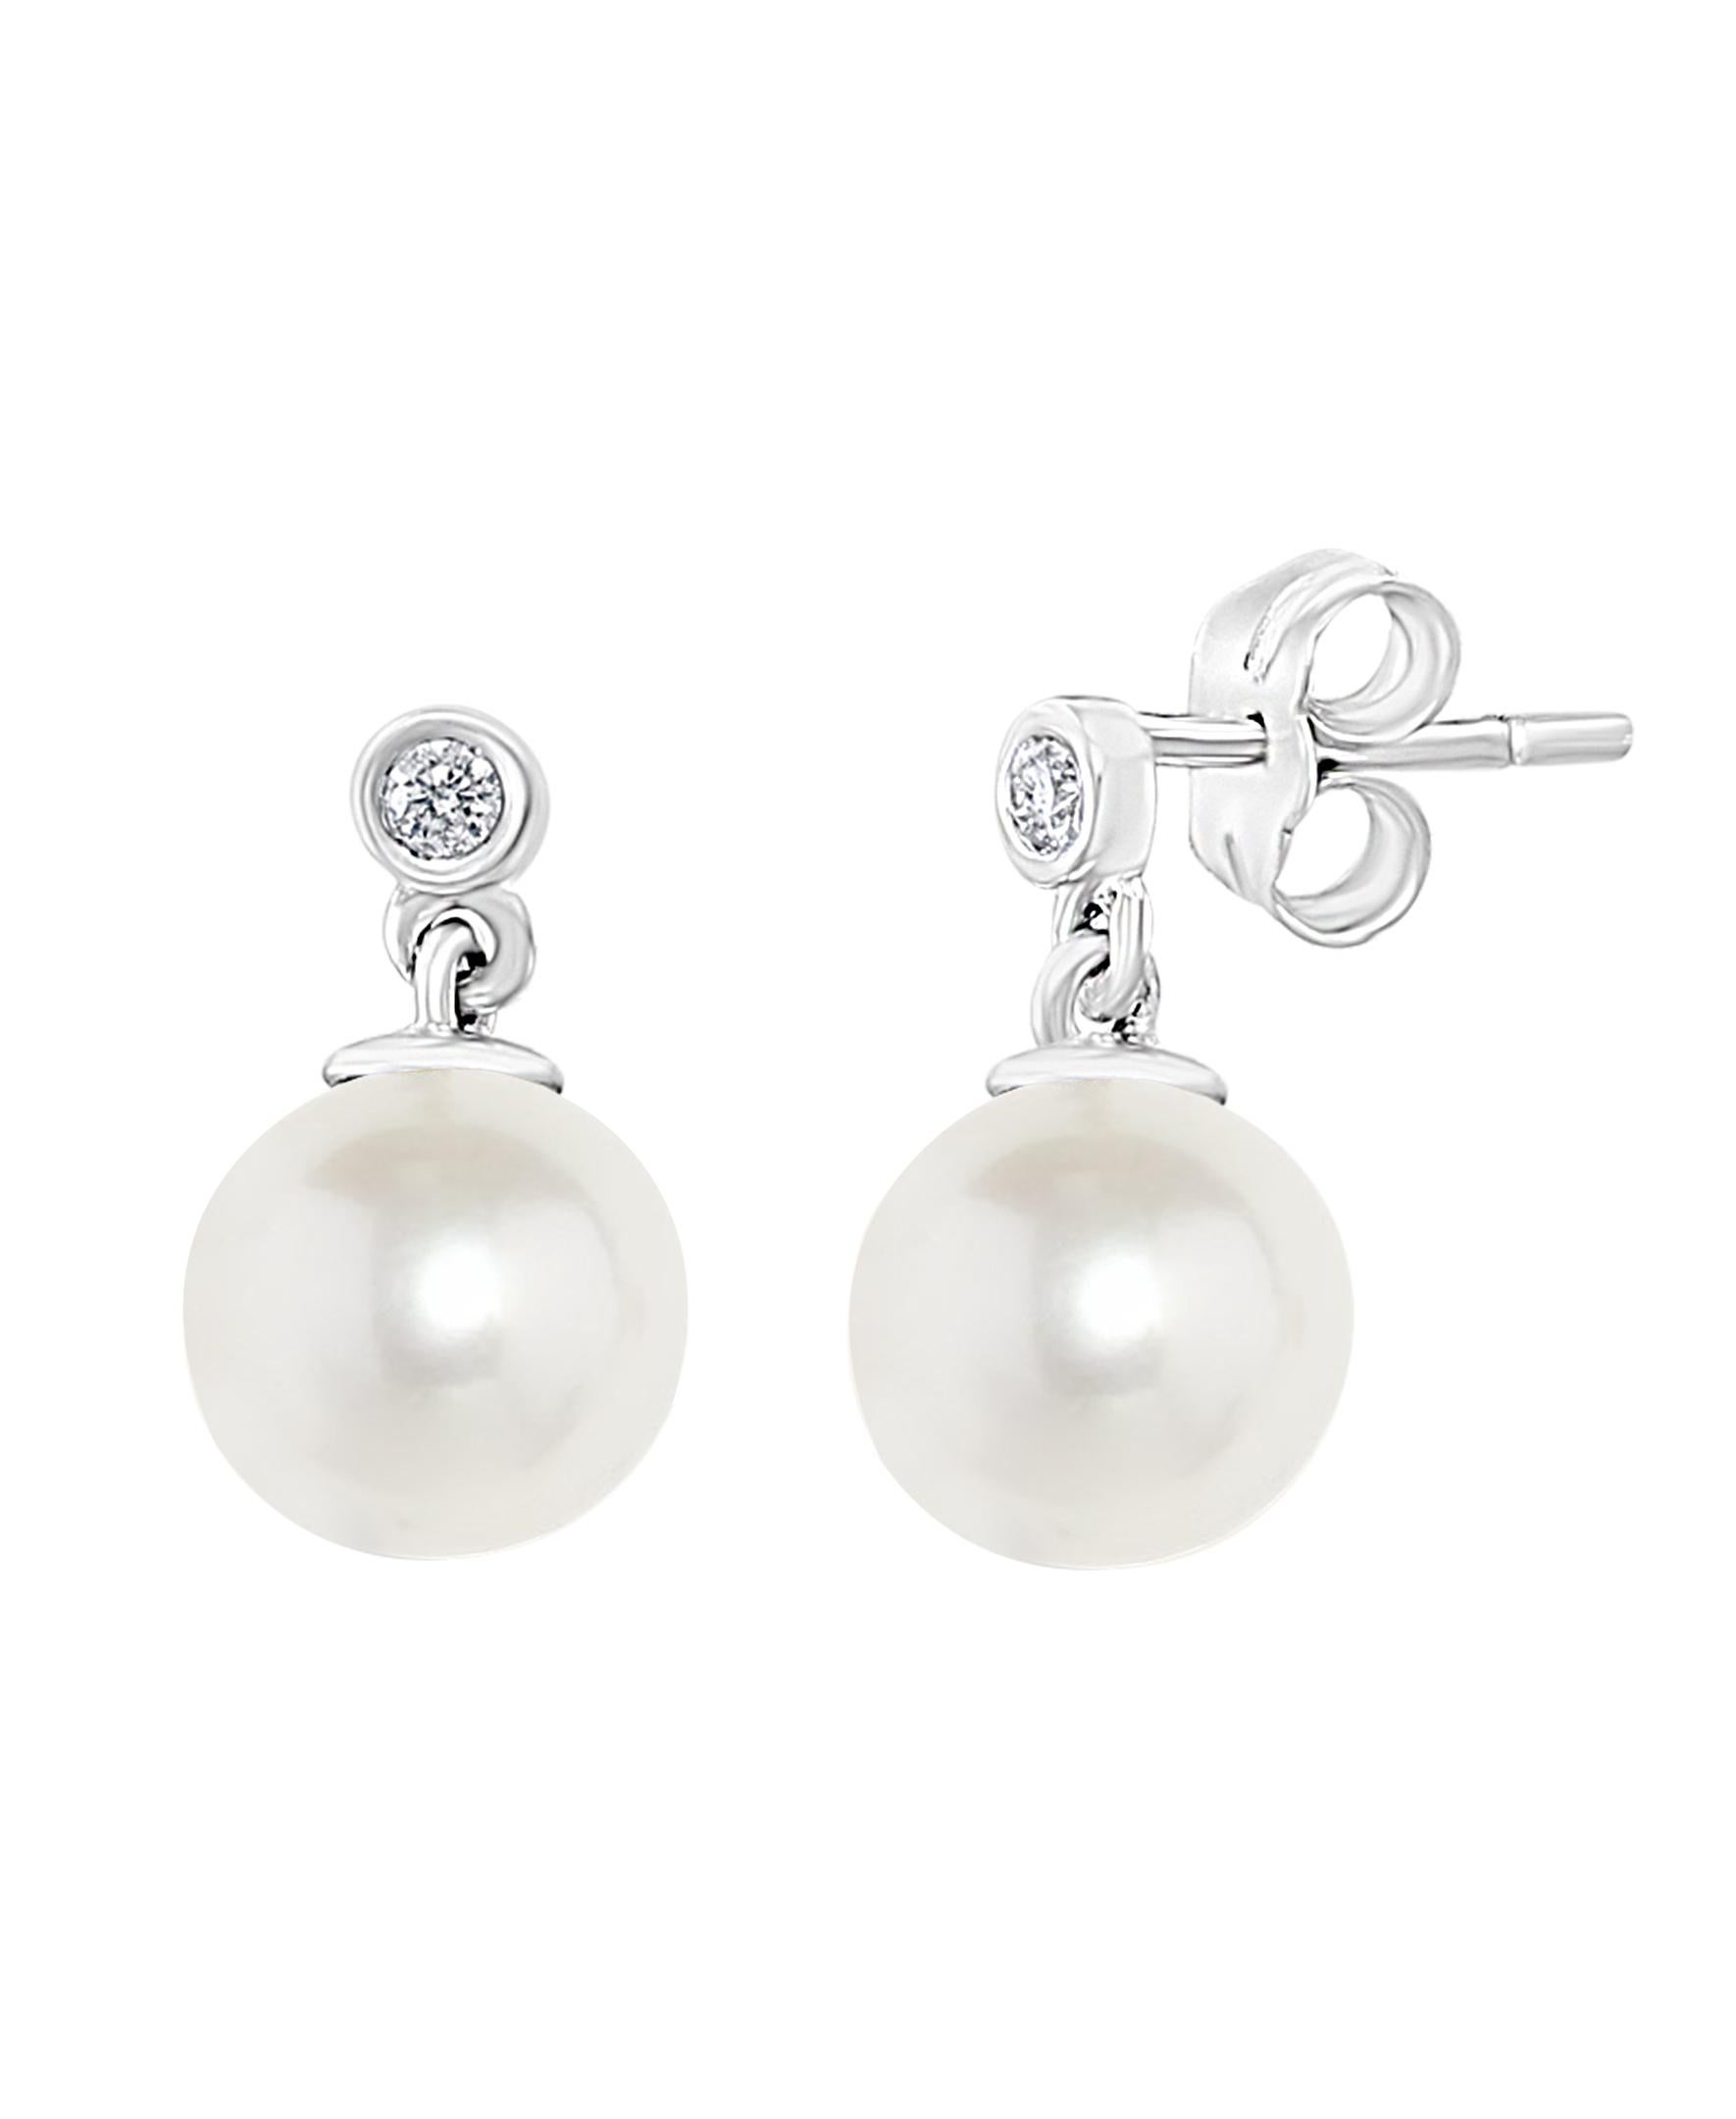 These Chinese Freshwater pearls hang off a diamond stud set in a round bezel. The classic yet versatile design of these earrings is perfect for the working woman or for an evening out on the town. 
- Total diamond weight is 0.06 carats. 
- 14K white